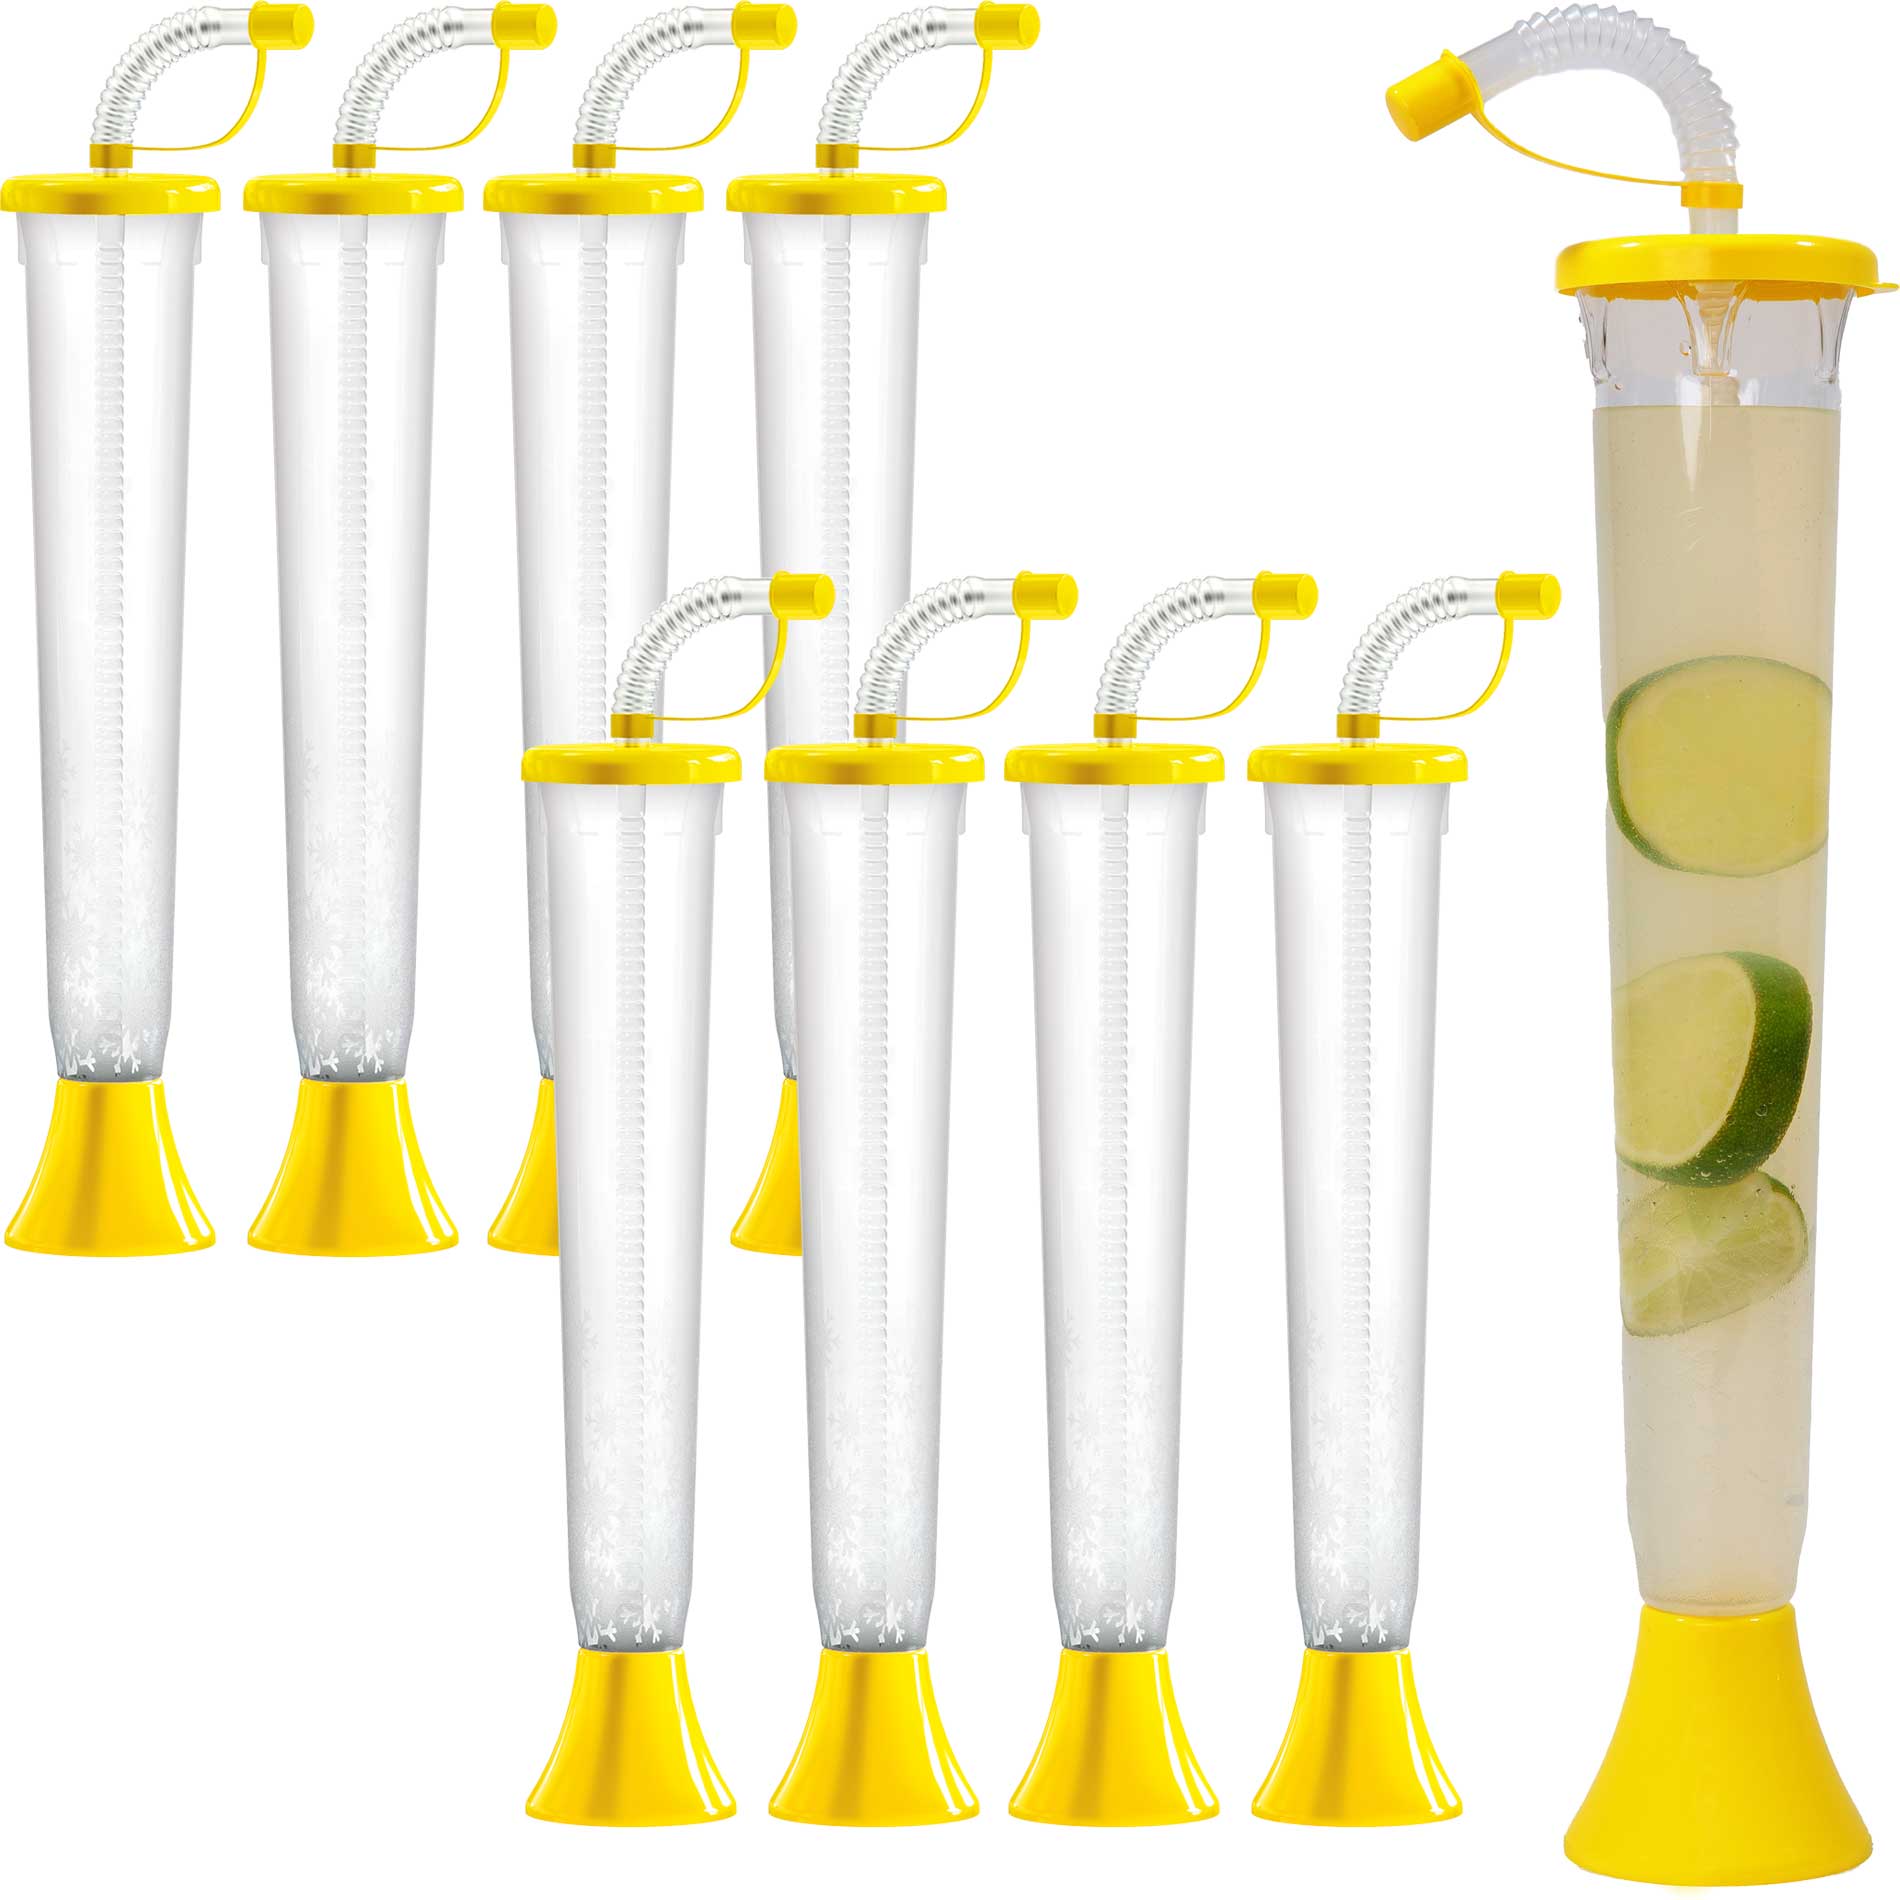 http://noveltycupsusa.com/cdn/shop/files/sweet-world-usa-yard-cups-54-or-108-cups-yard-cups-with-yellow-lids-and-straws-14oz-for-margaritas-and-frozen-drinks-cups-with-lids-and-straws-35523778609311.jpg?v=1684775852